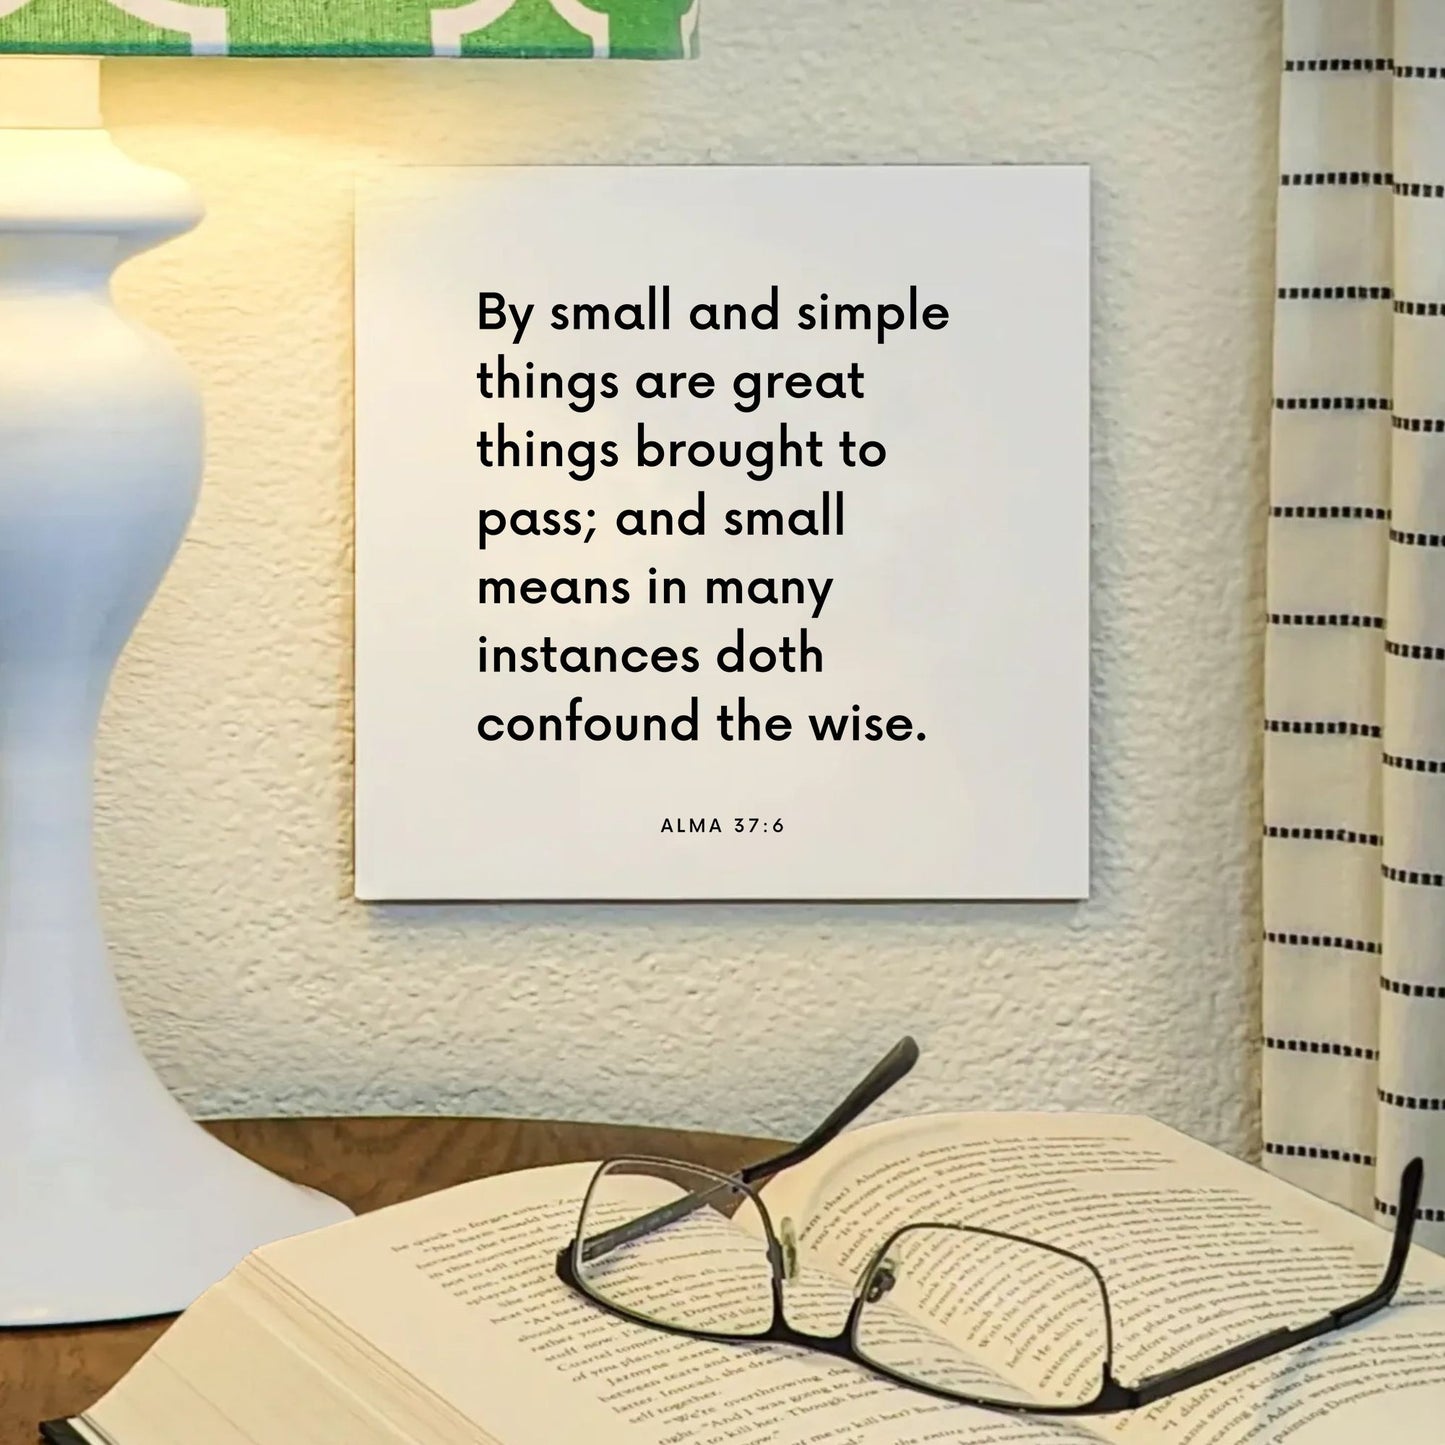 Lamp mouting of the scripture tile for Alma 37:6 - "By small and simple things are great things brought to pass"